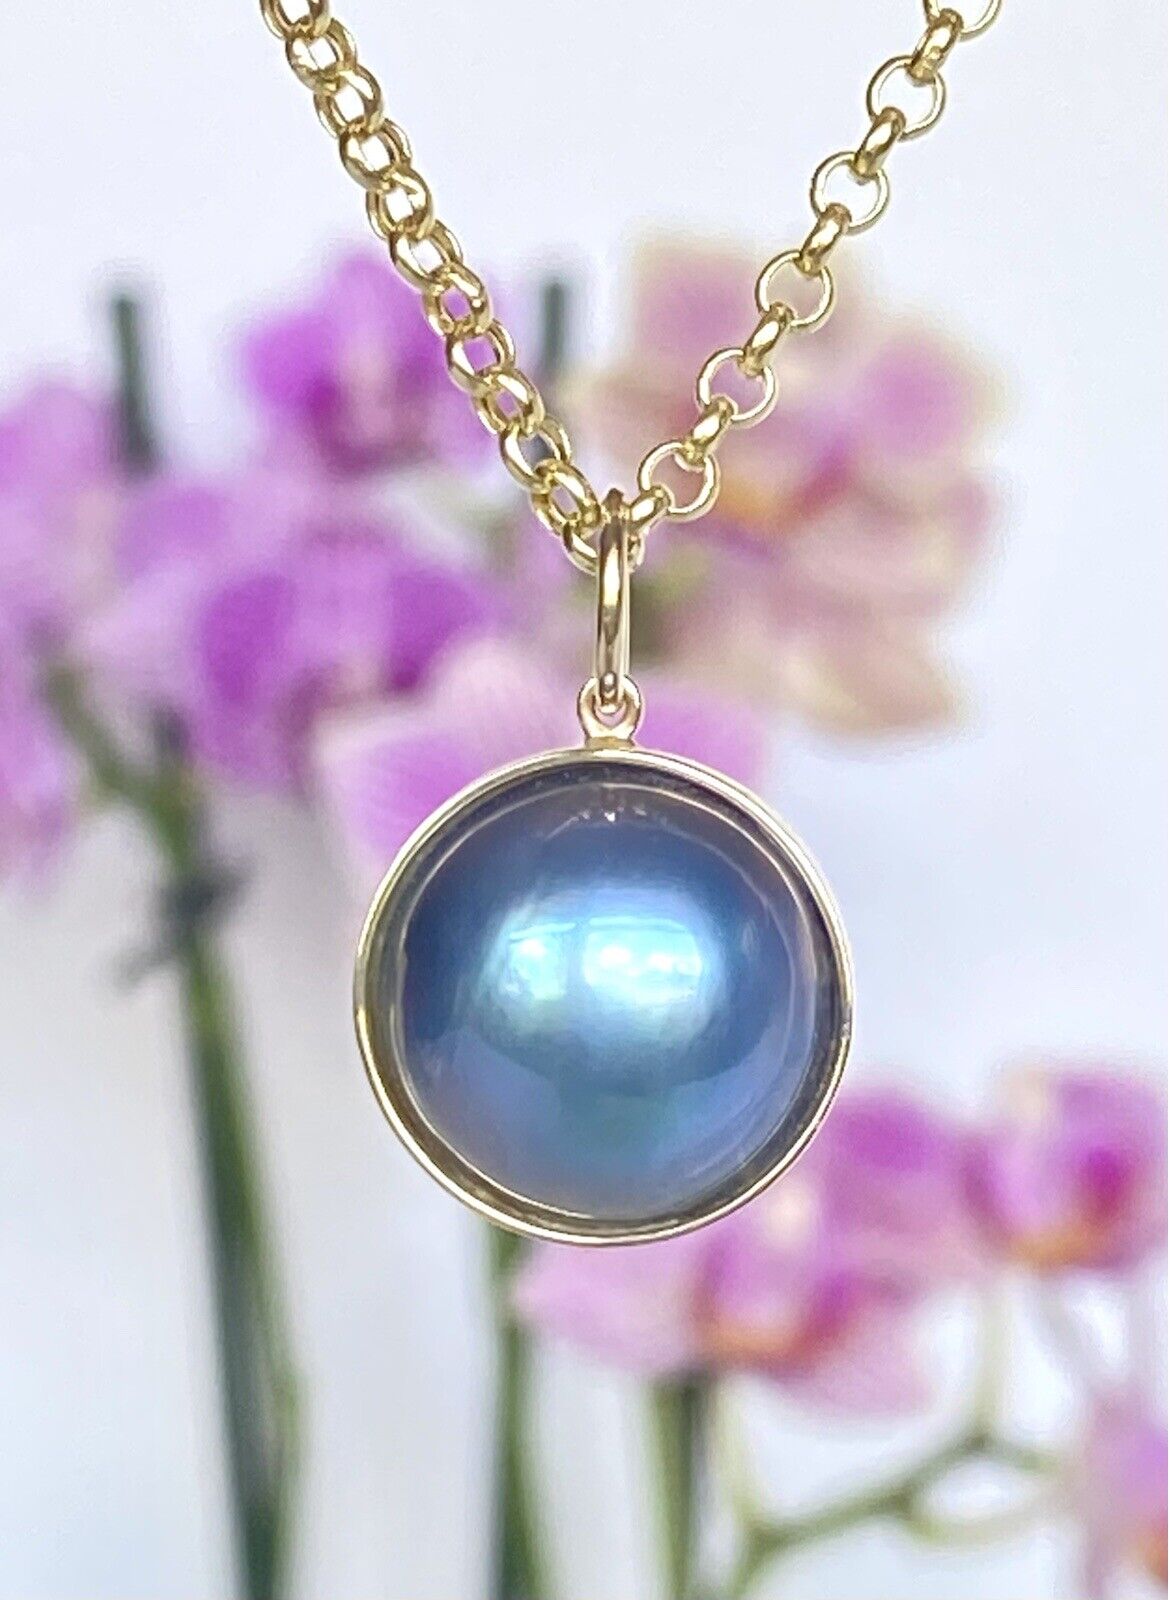 Genuine Peacock Blue Mabe Pearl (13mm) Solid 14K Yellow Gold Pendant, New #1